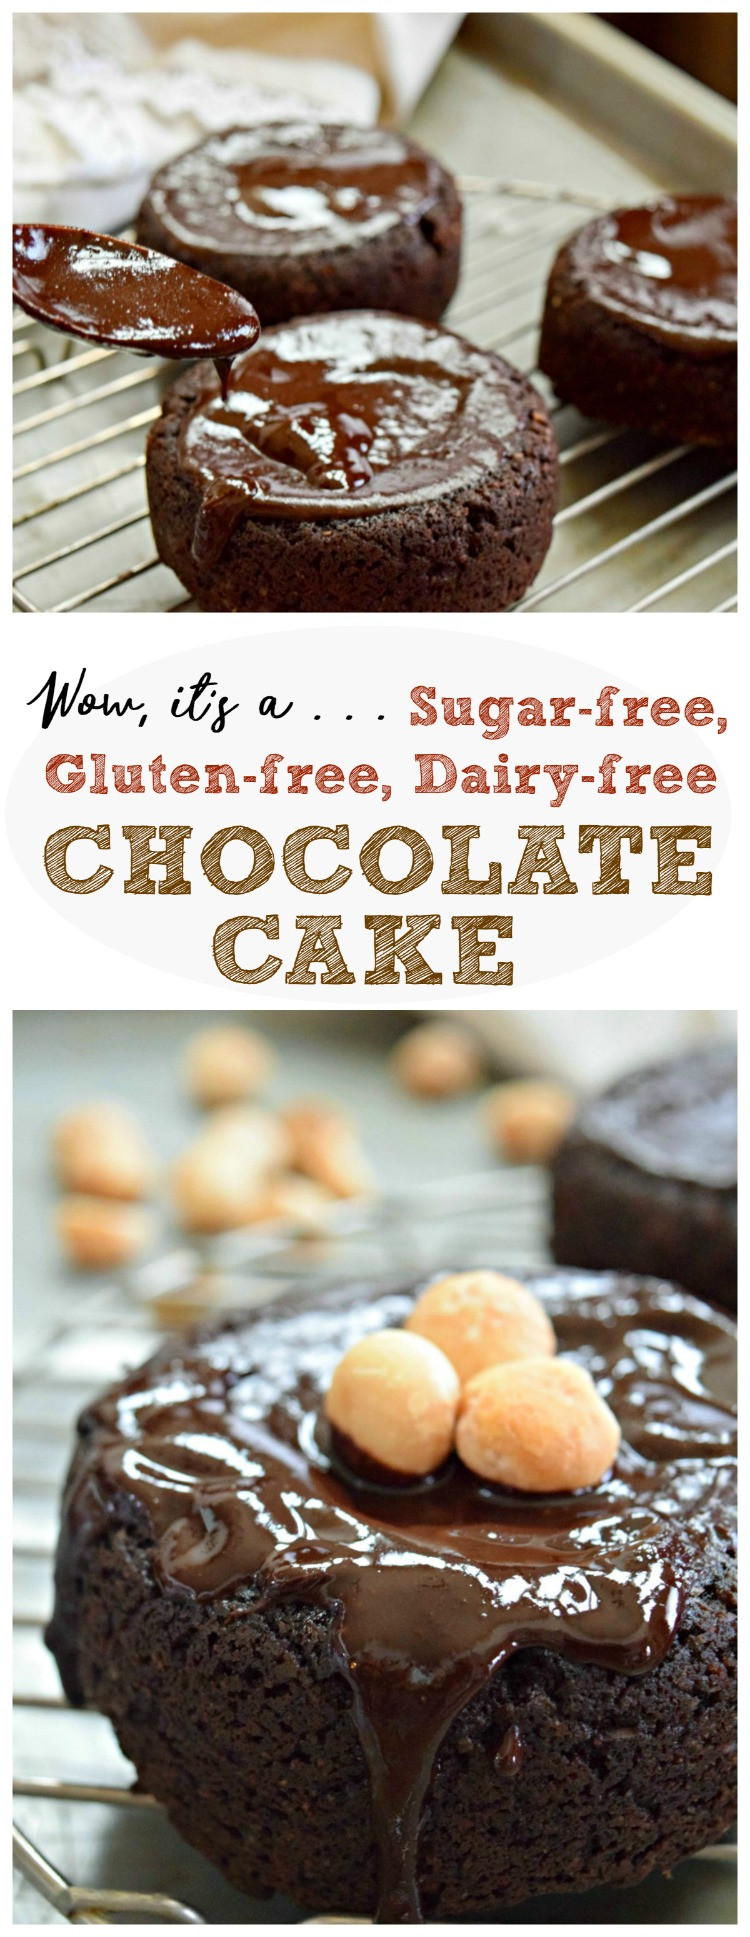 Gluten And Dairy Free Cake Recipe
 Wow It’s a Sugar free Gluten free Dairy free Paleo